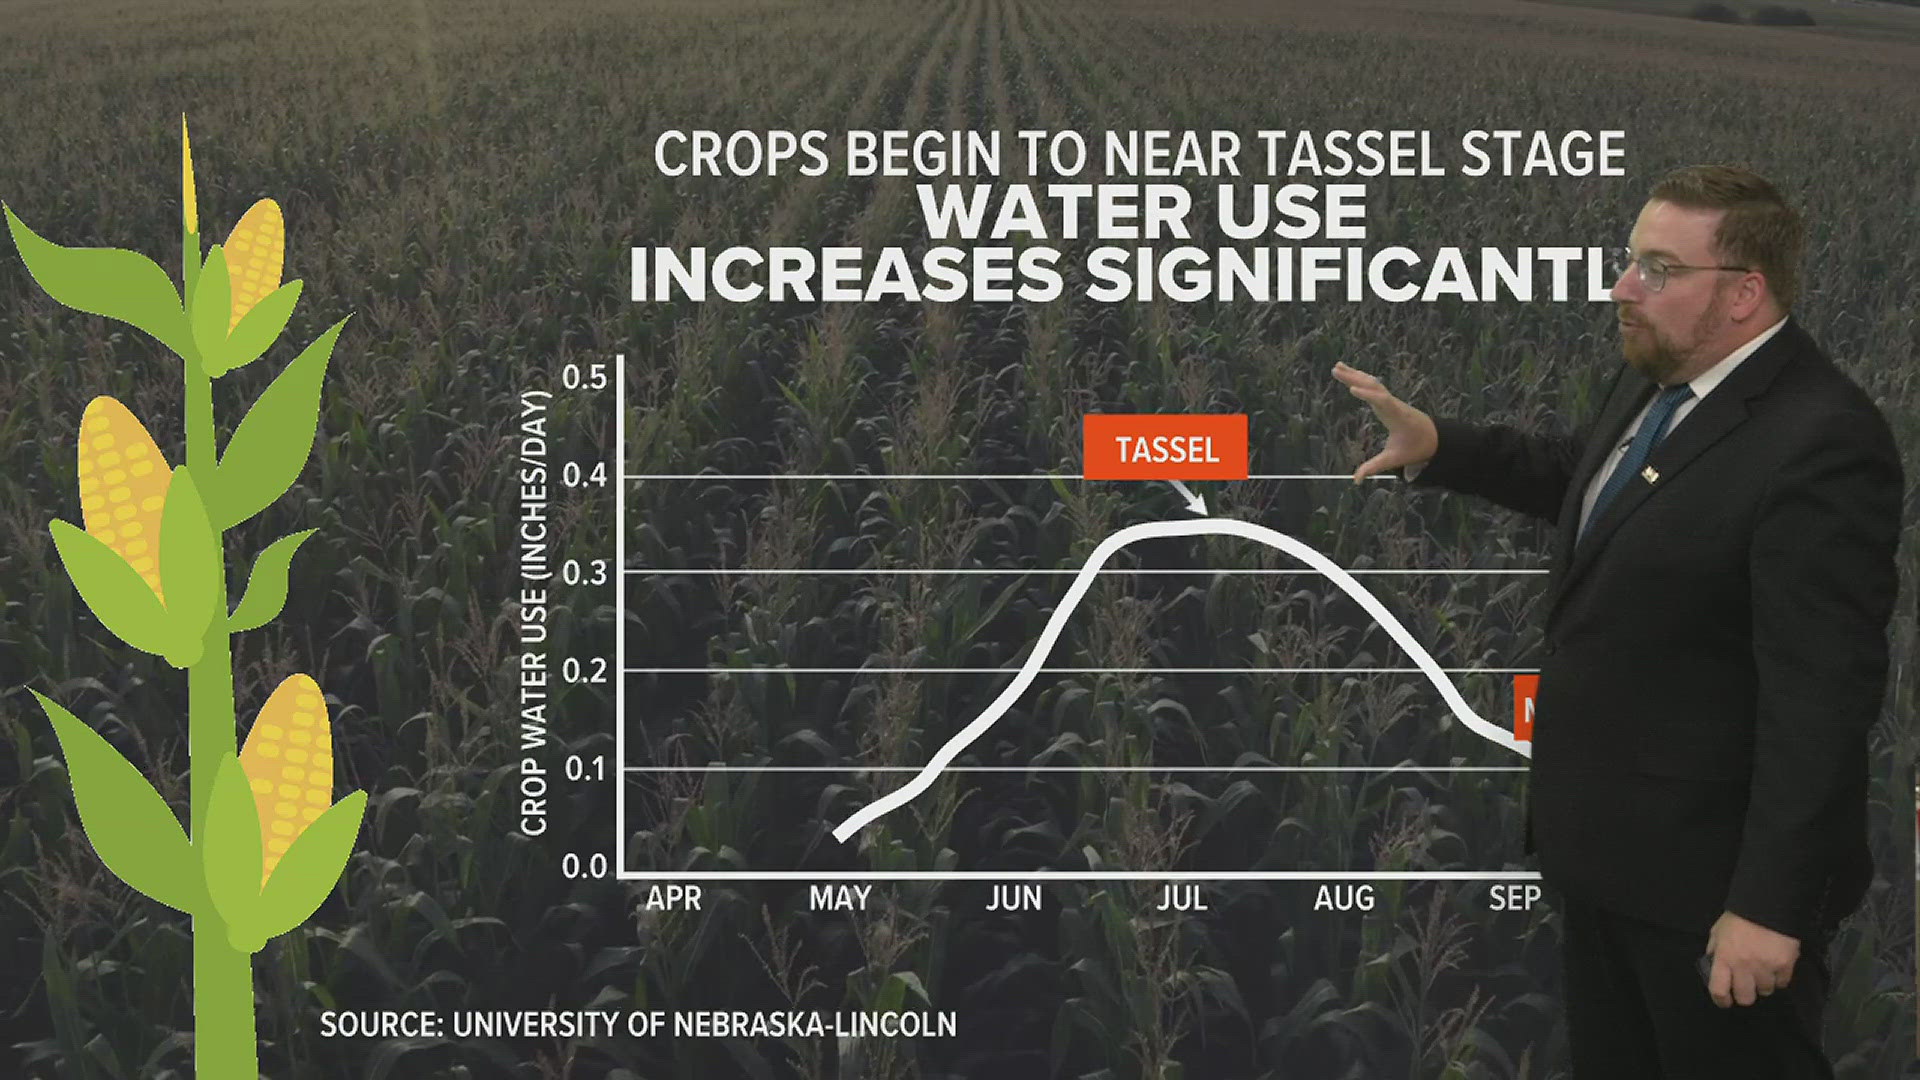 Corn sweat typically peaks during the month of July, here's why it makes the air feel hotter.